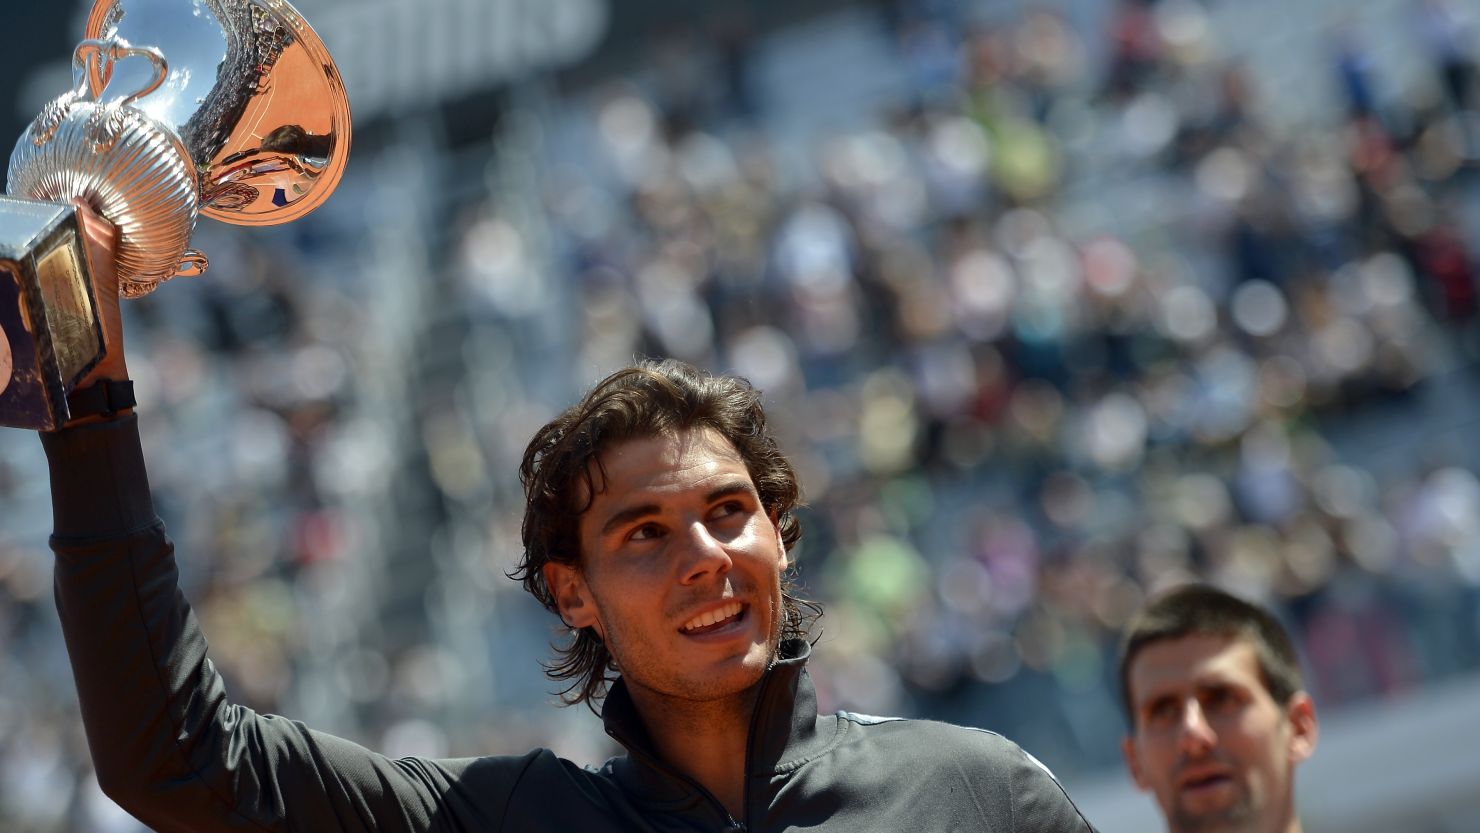 Rafael Nadal moved to number two on the world rankings after beating Novak Djokovic in the final of the Rome Masters.